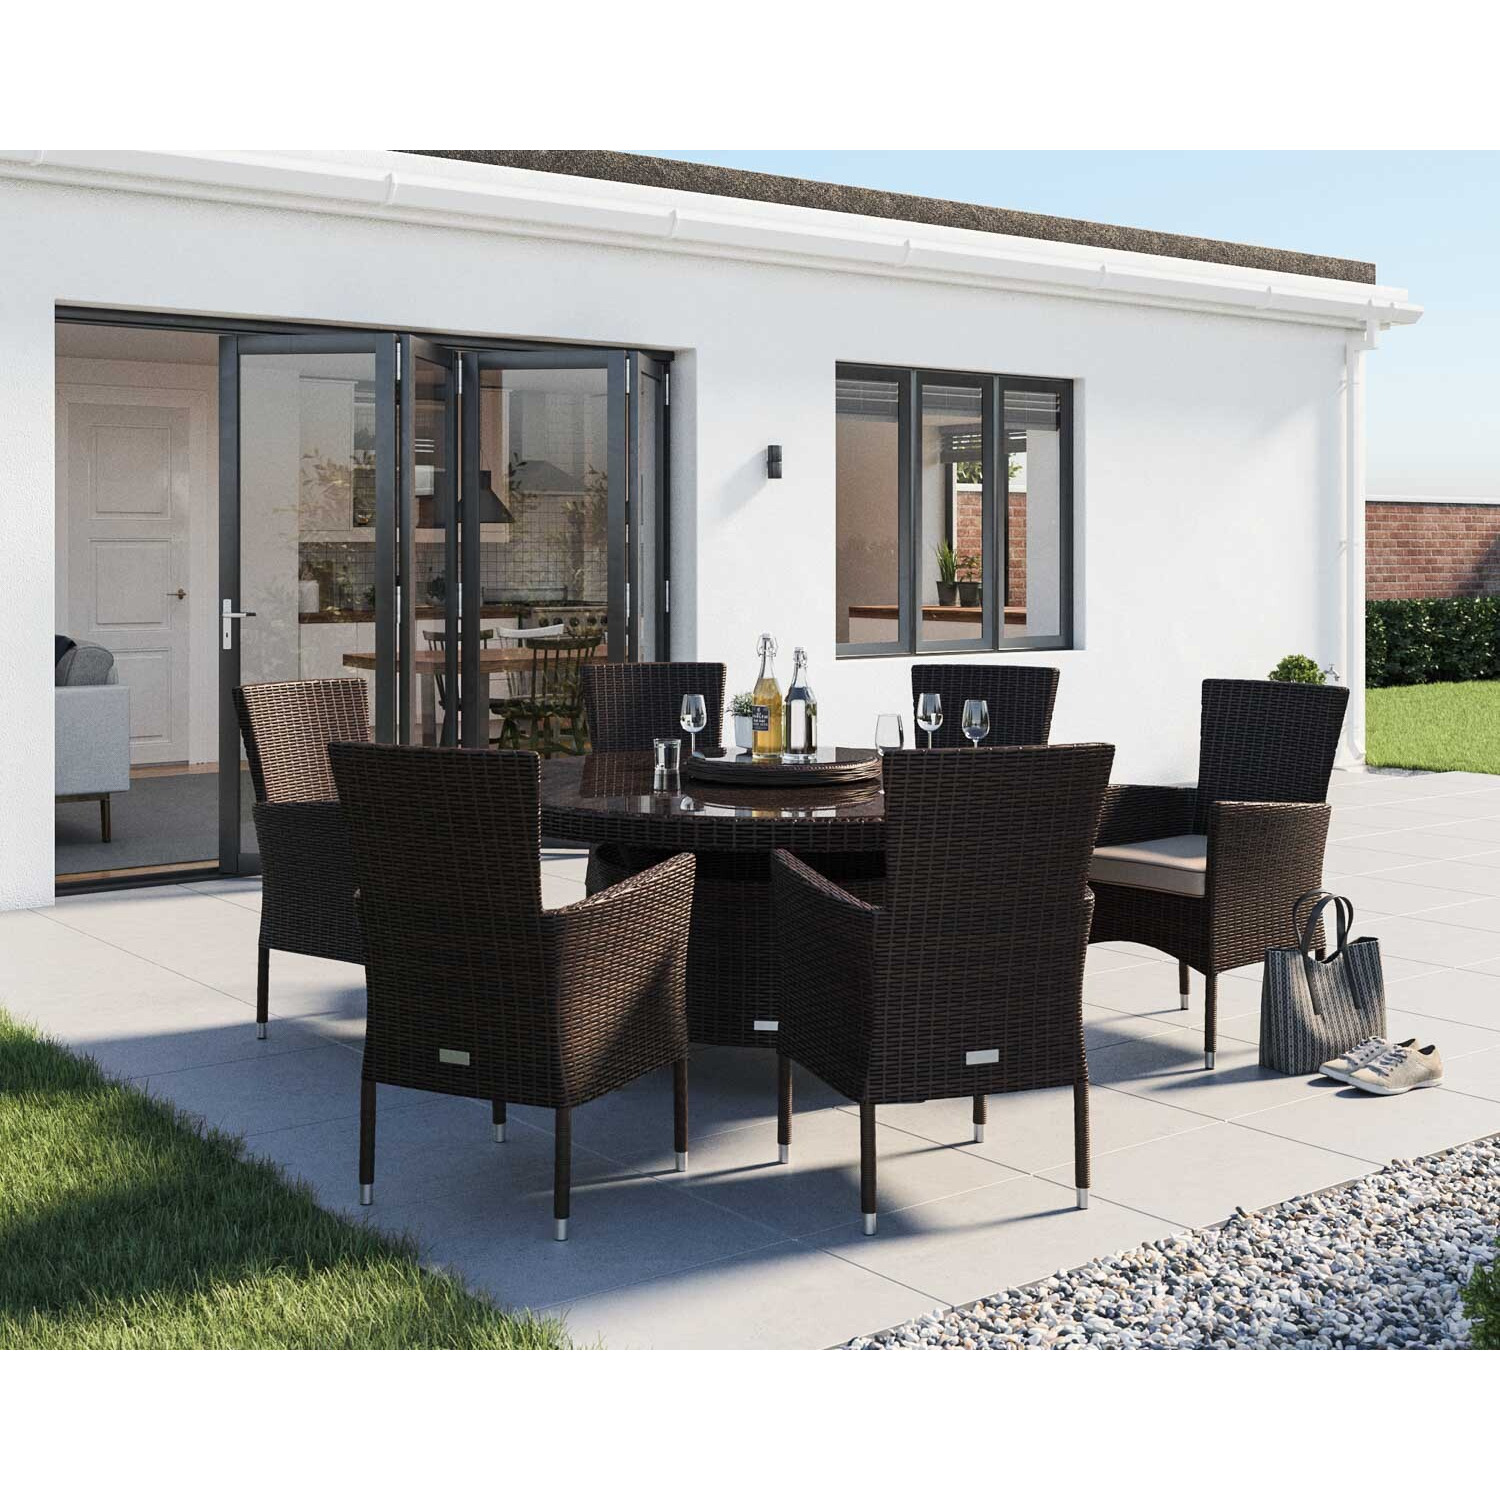 6 Seat Rattan Garden Dining Set With Large Round Dining Table Set in Brown - Cambridge - Rattan Direct